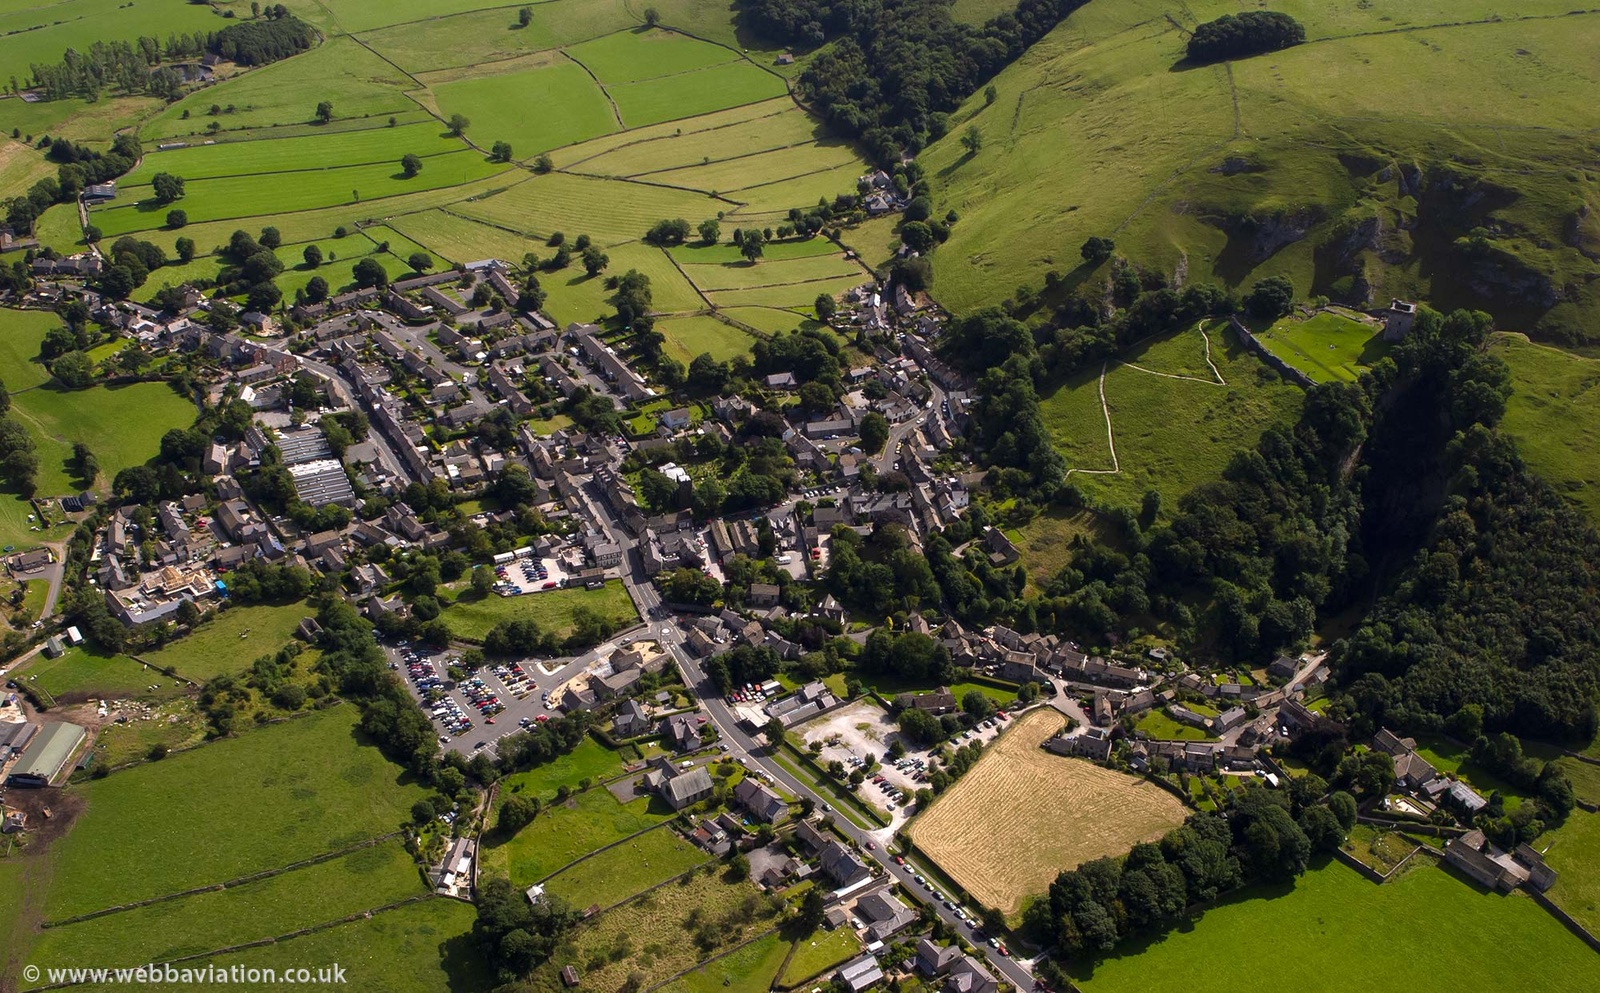 Castleton, Derbyshire from the air